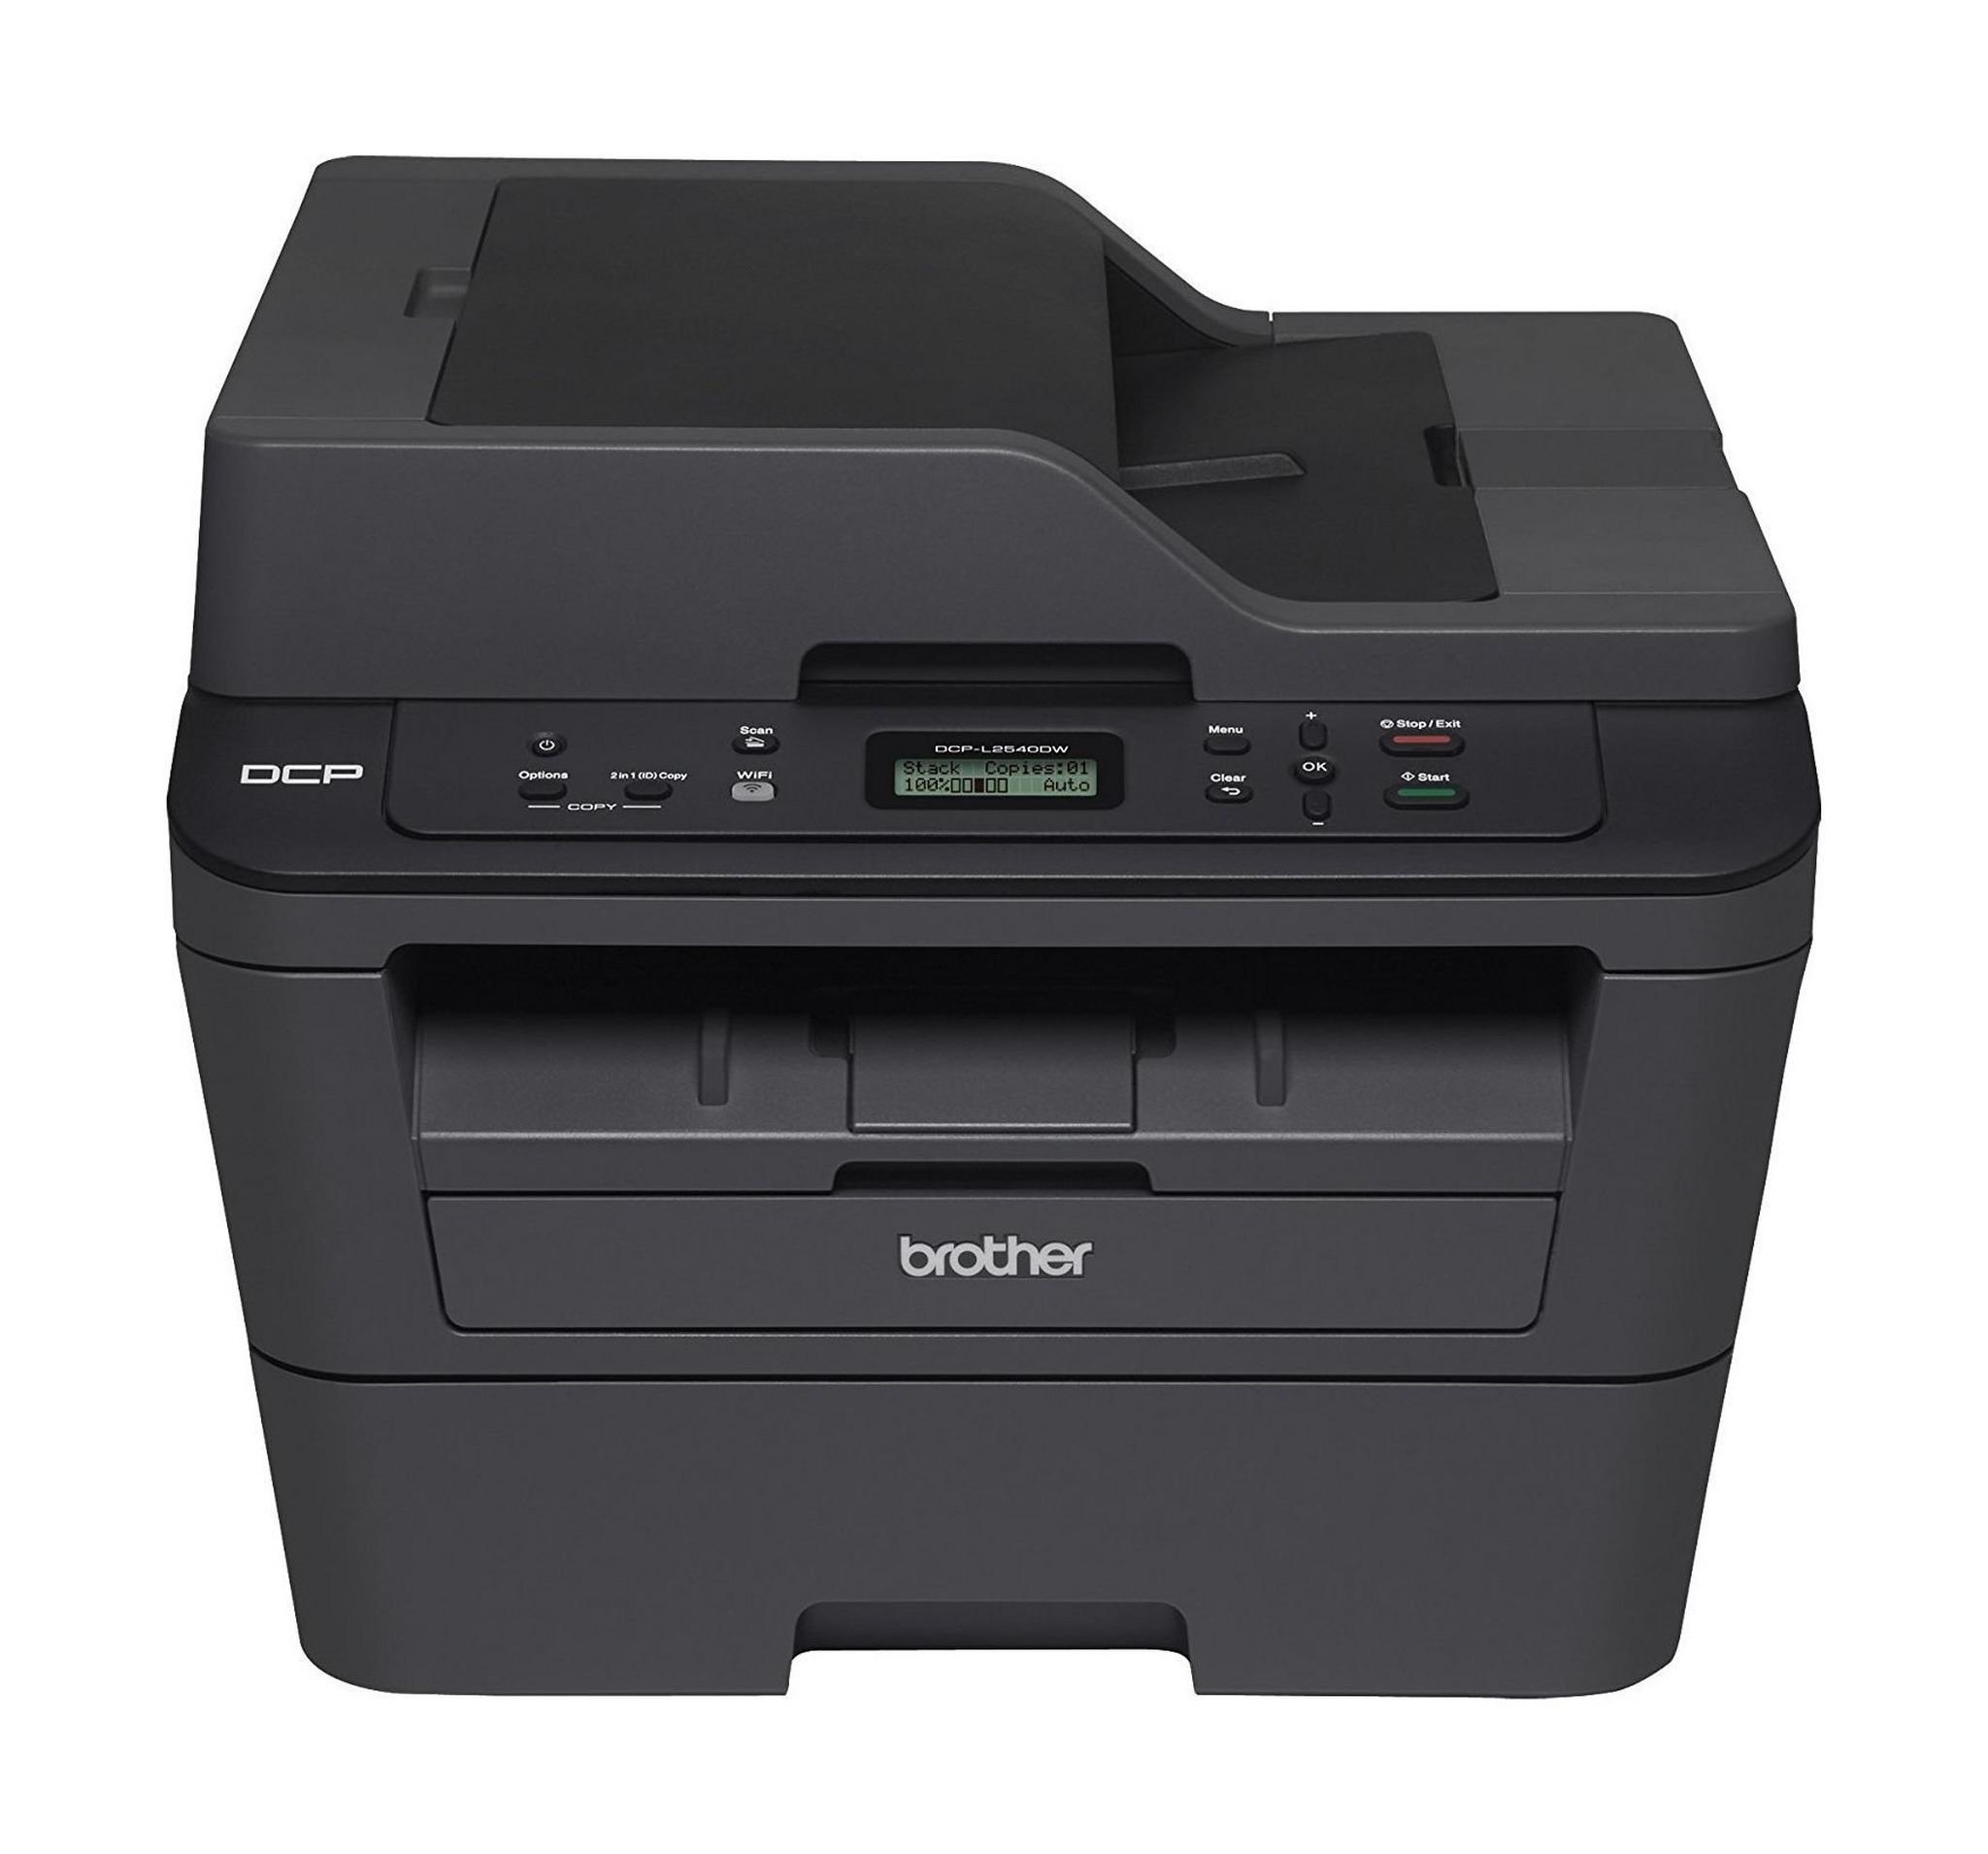 Brother Wireless Monochrome Laser Multi-Function Printer (DCP-L2540DW)